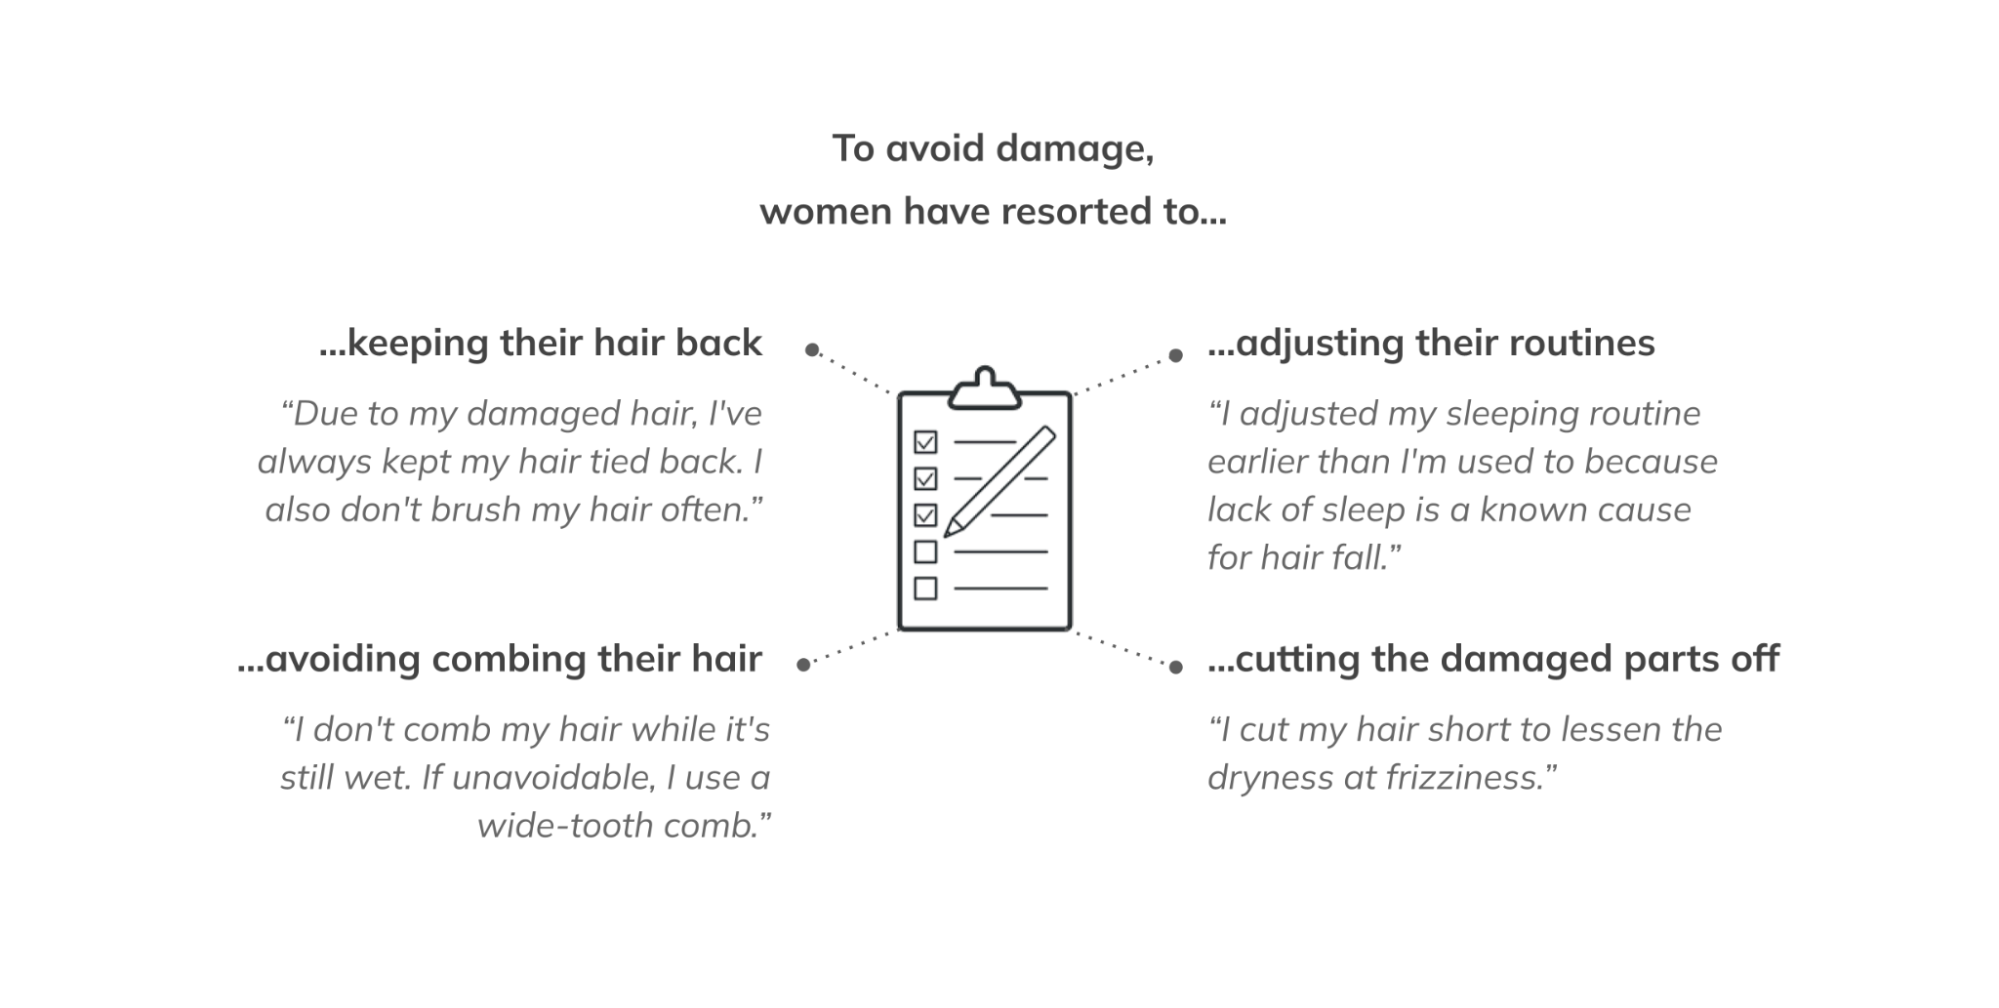 Hair care practices 